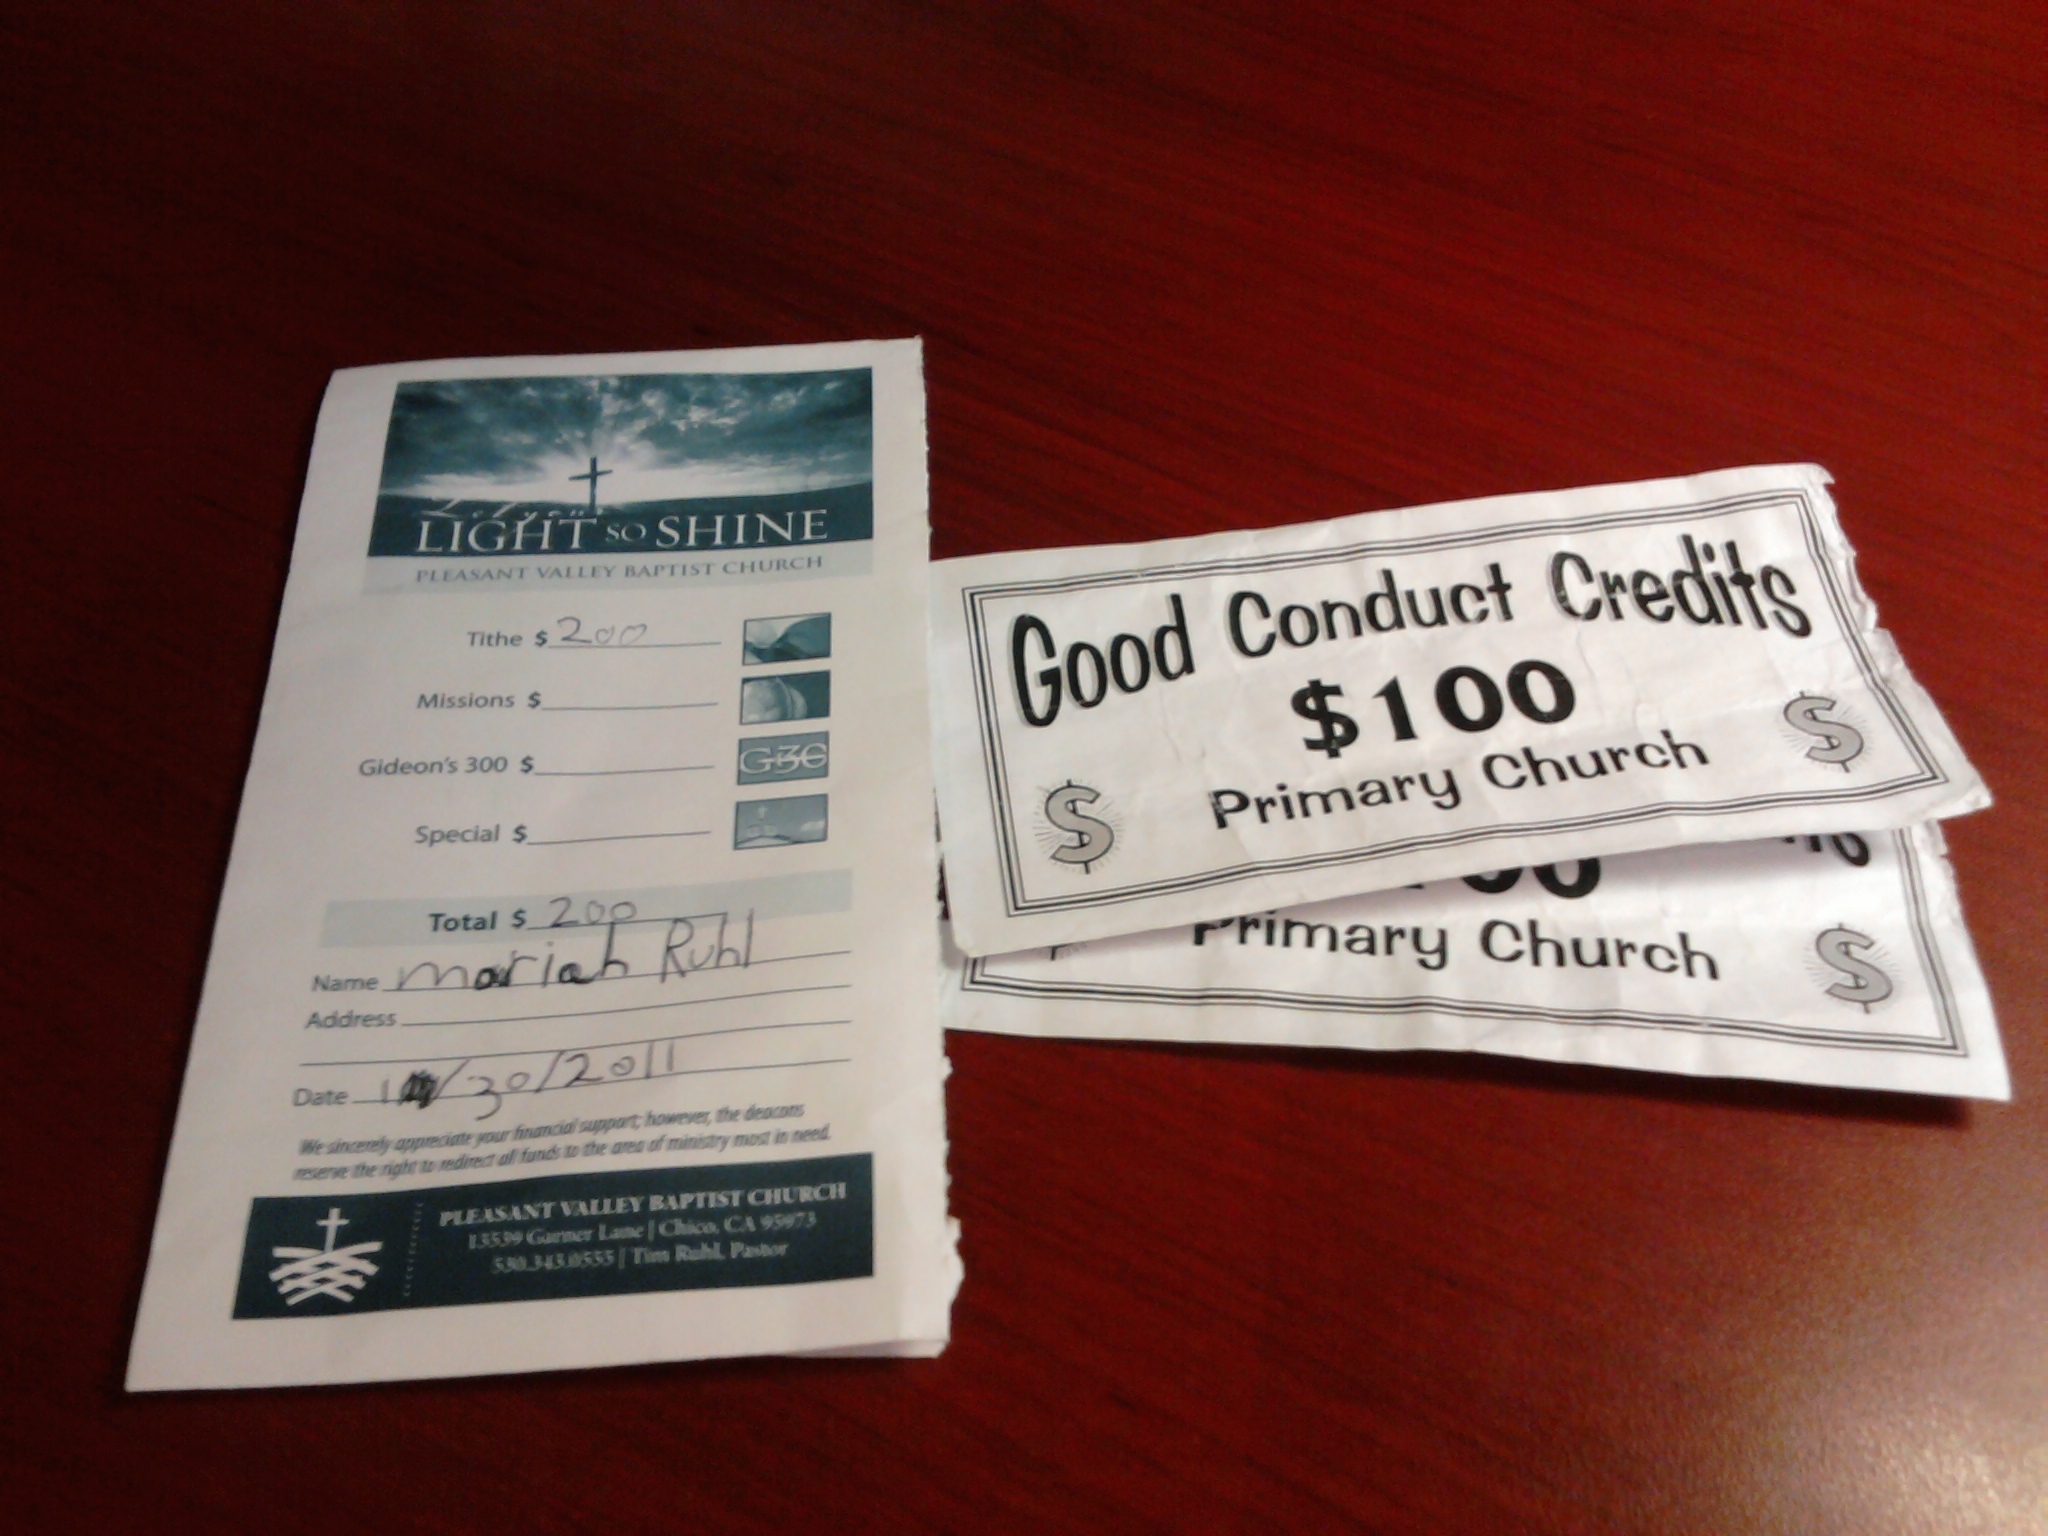 Tithing on Good Conduct Credits